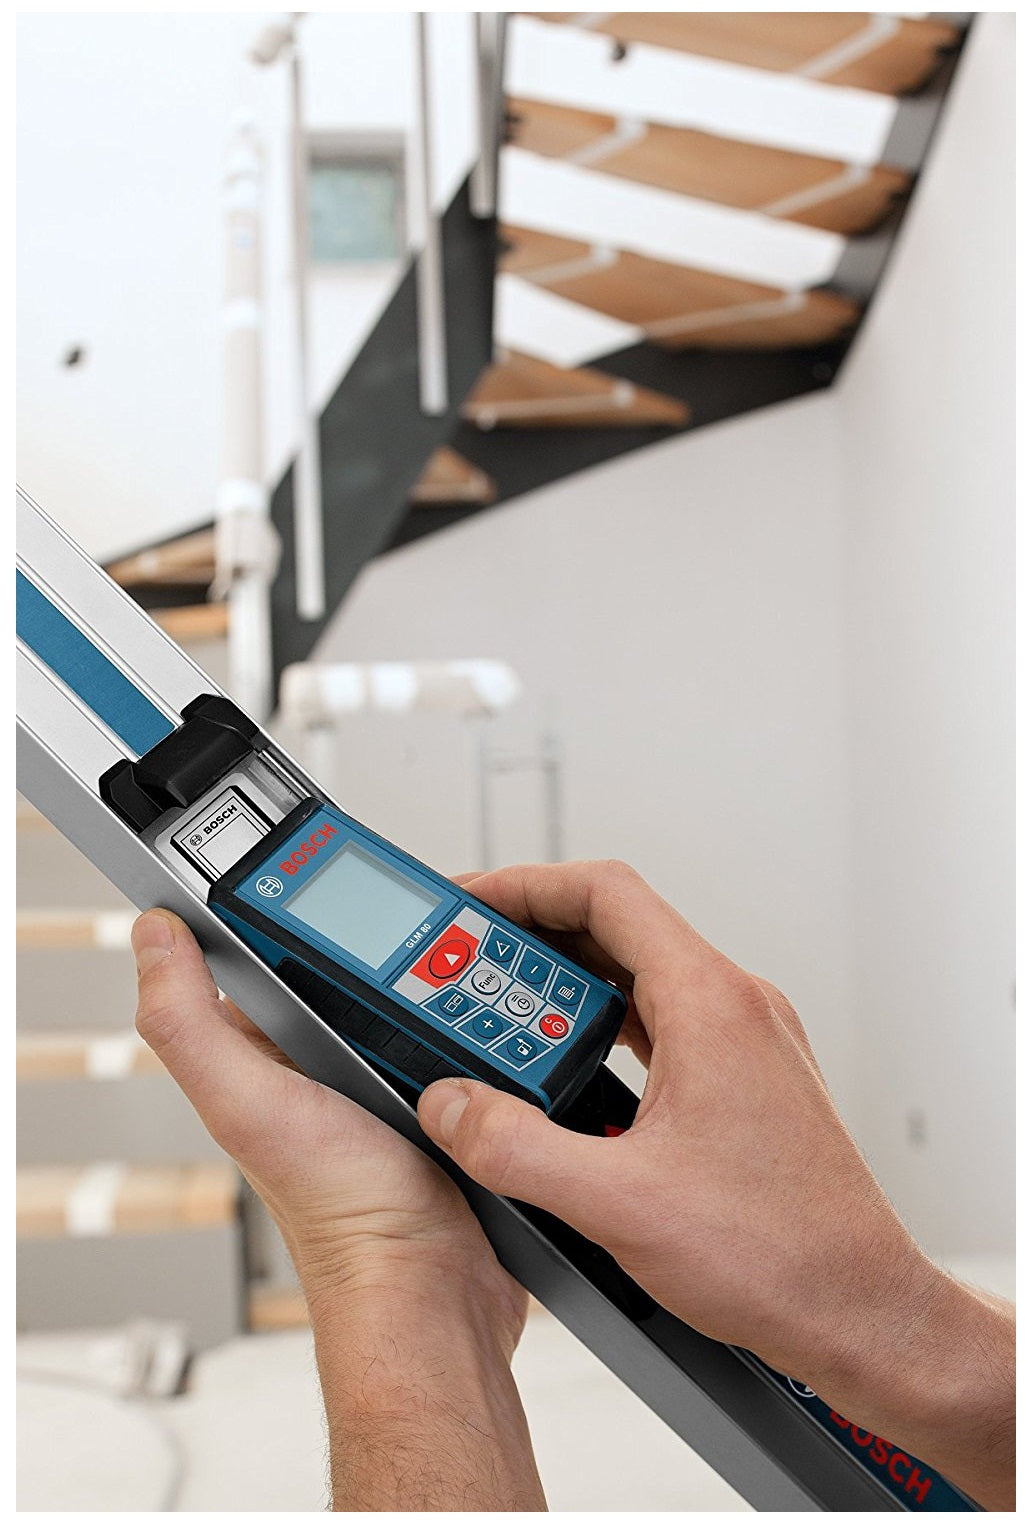 buy electronic measuring devices at cheap rate in bulk. wholesale & retail building hand tools store. home décor ideas, maintenance, repair replacement parts